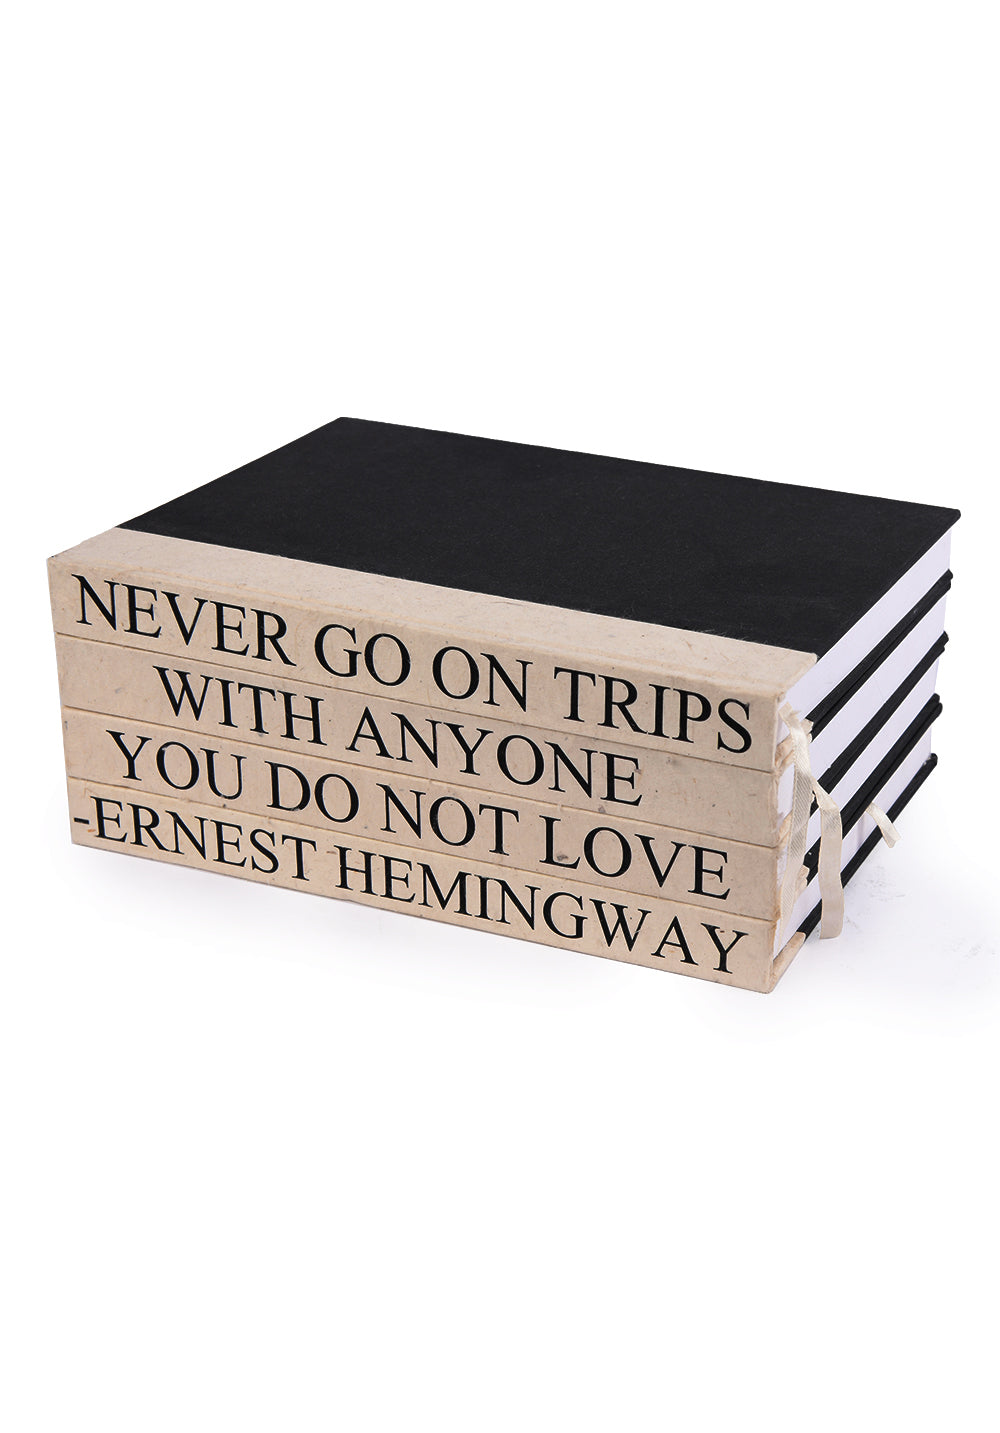 "NEVER GO ON TRIPS..."